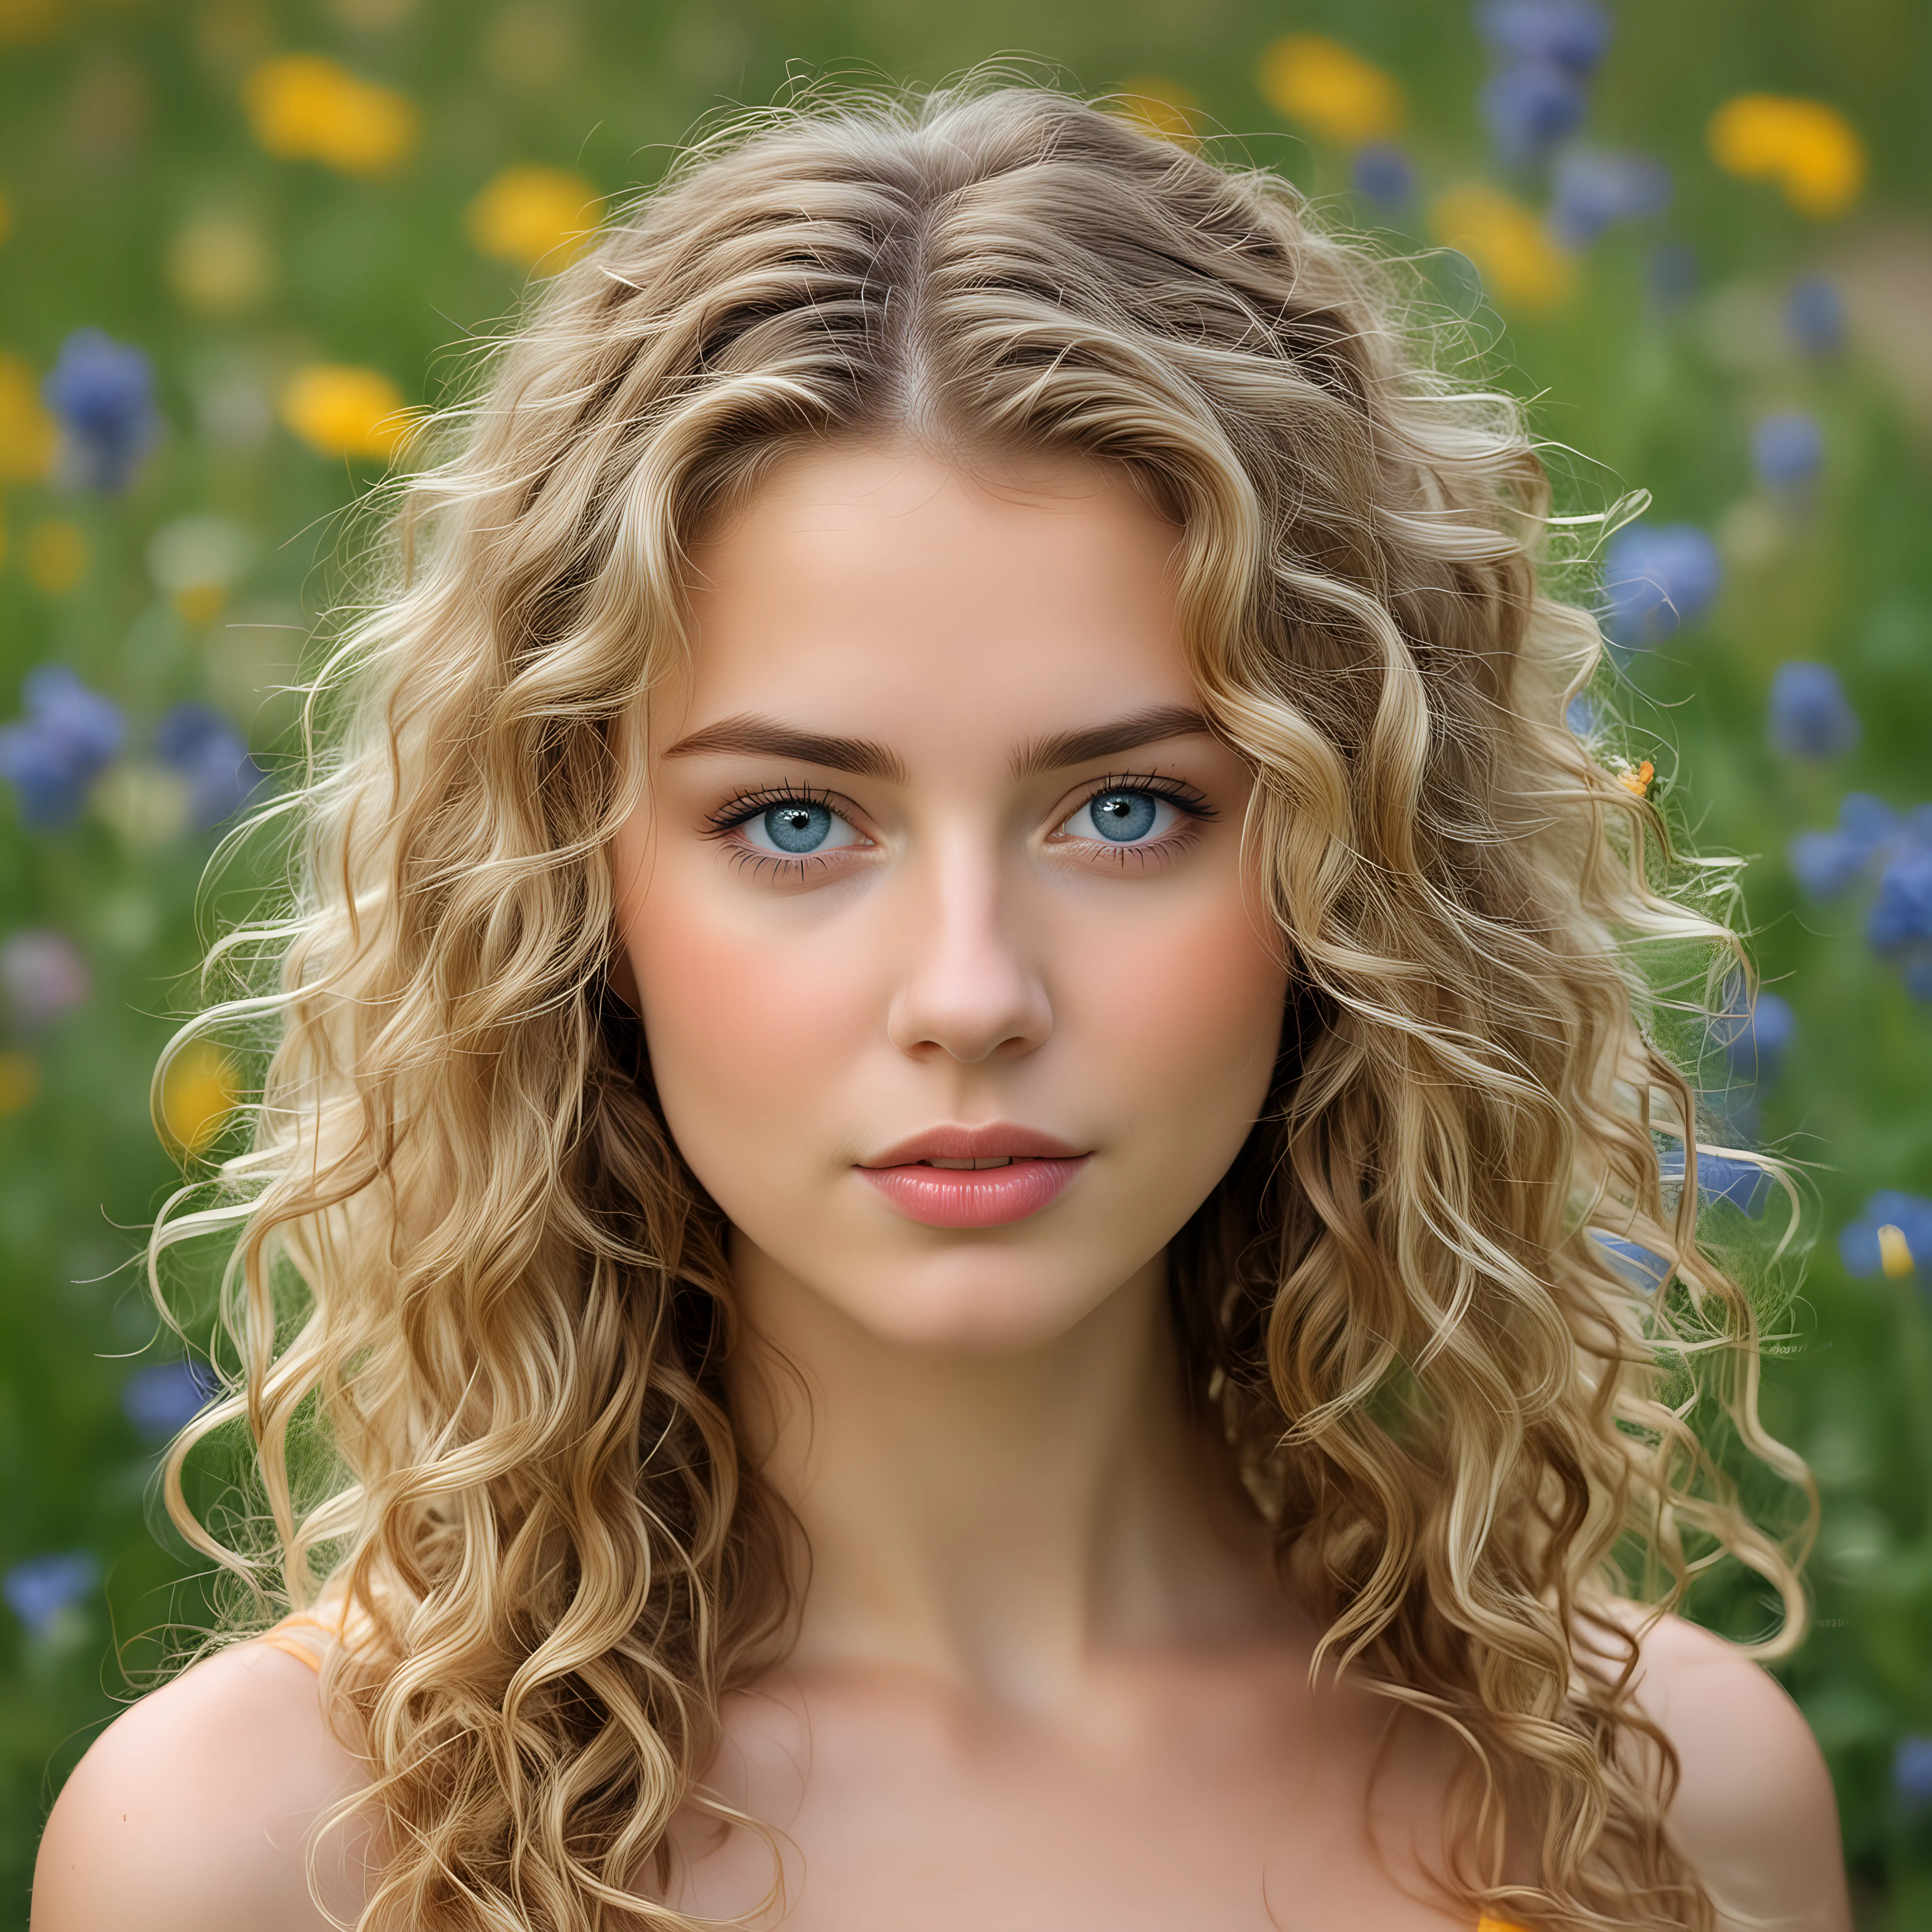 beautiful, girl with long curly blond hair, beautiful large blue eyes, high cheek bones, pouty lips, 26 years old, spring wildflowers, Renoir, colorful, vivid, vibrant::5 high quality photo::2 35mm lens::1 sharp-focus::1 ISO 100::1 natural light::1 close up::1 --ar 2:3 --s 1000 --q 5
